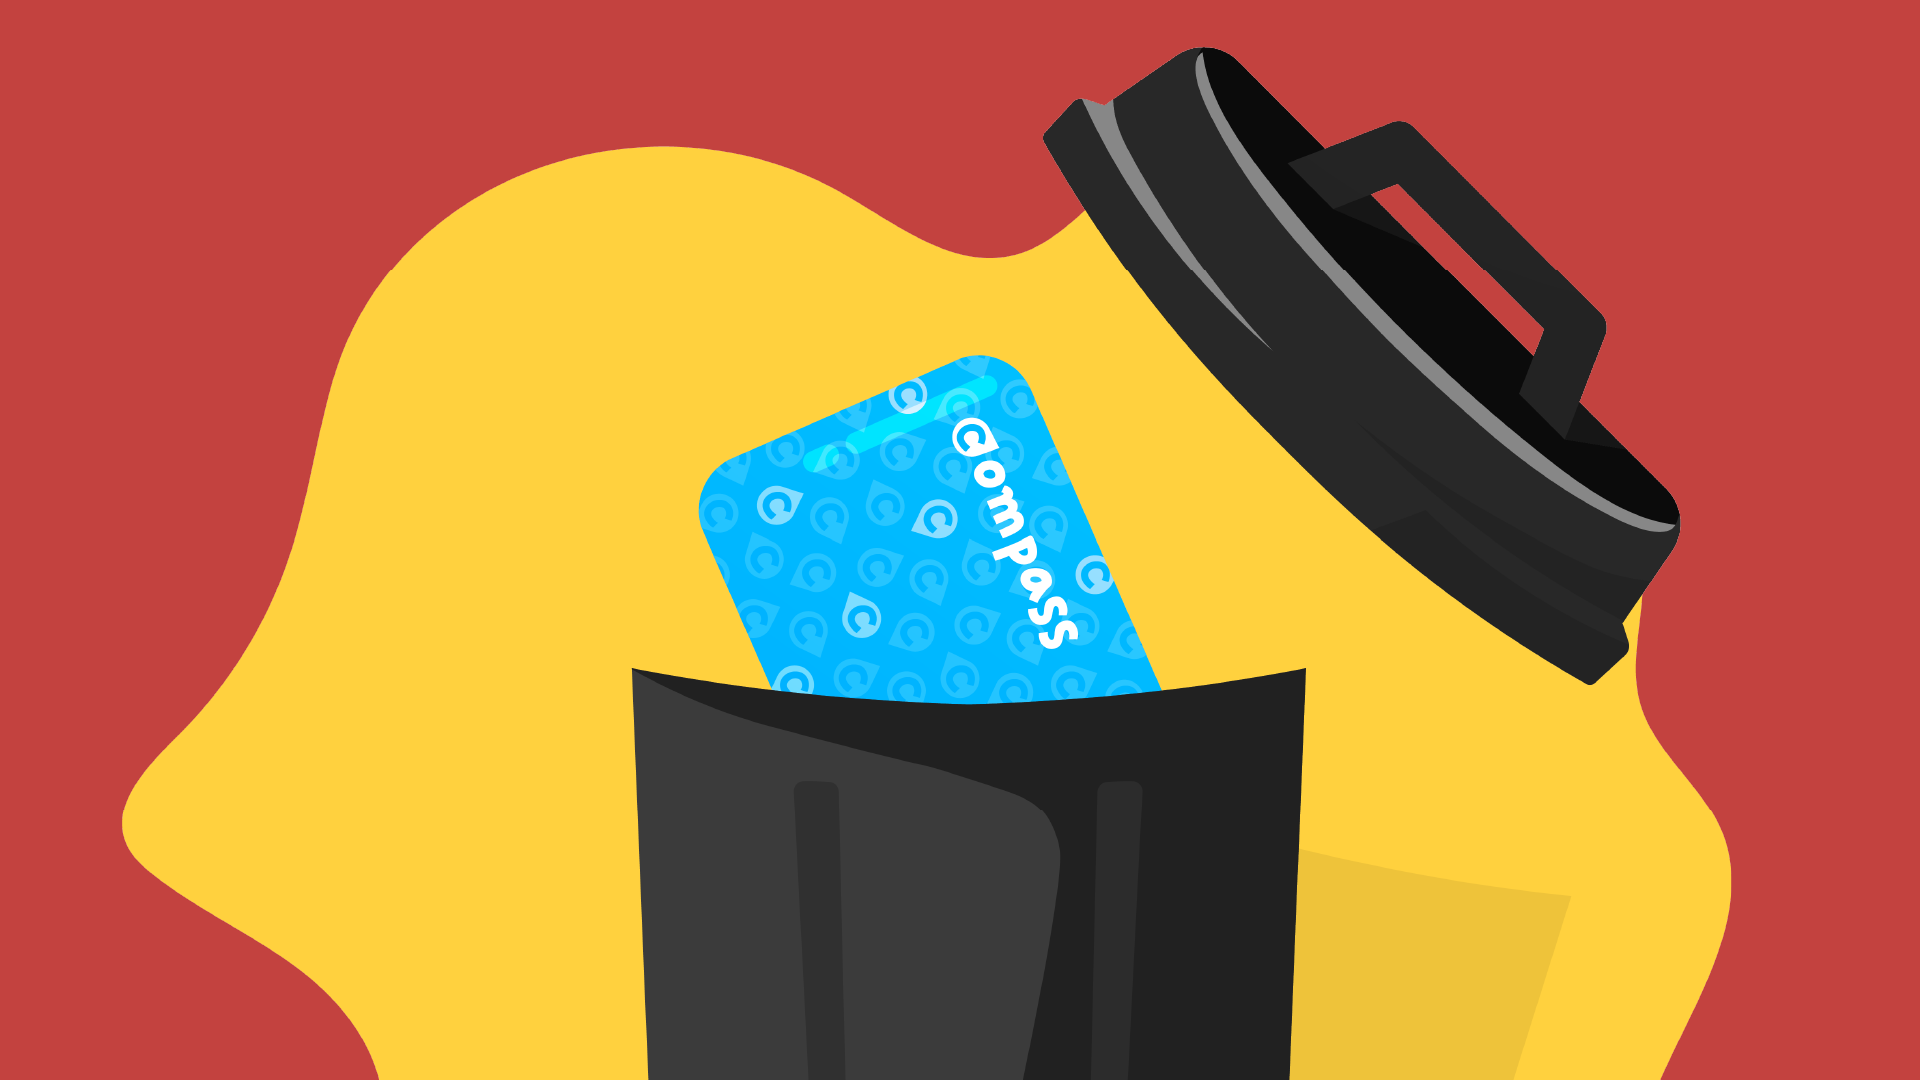 illustration of a compass card in a garbage can